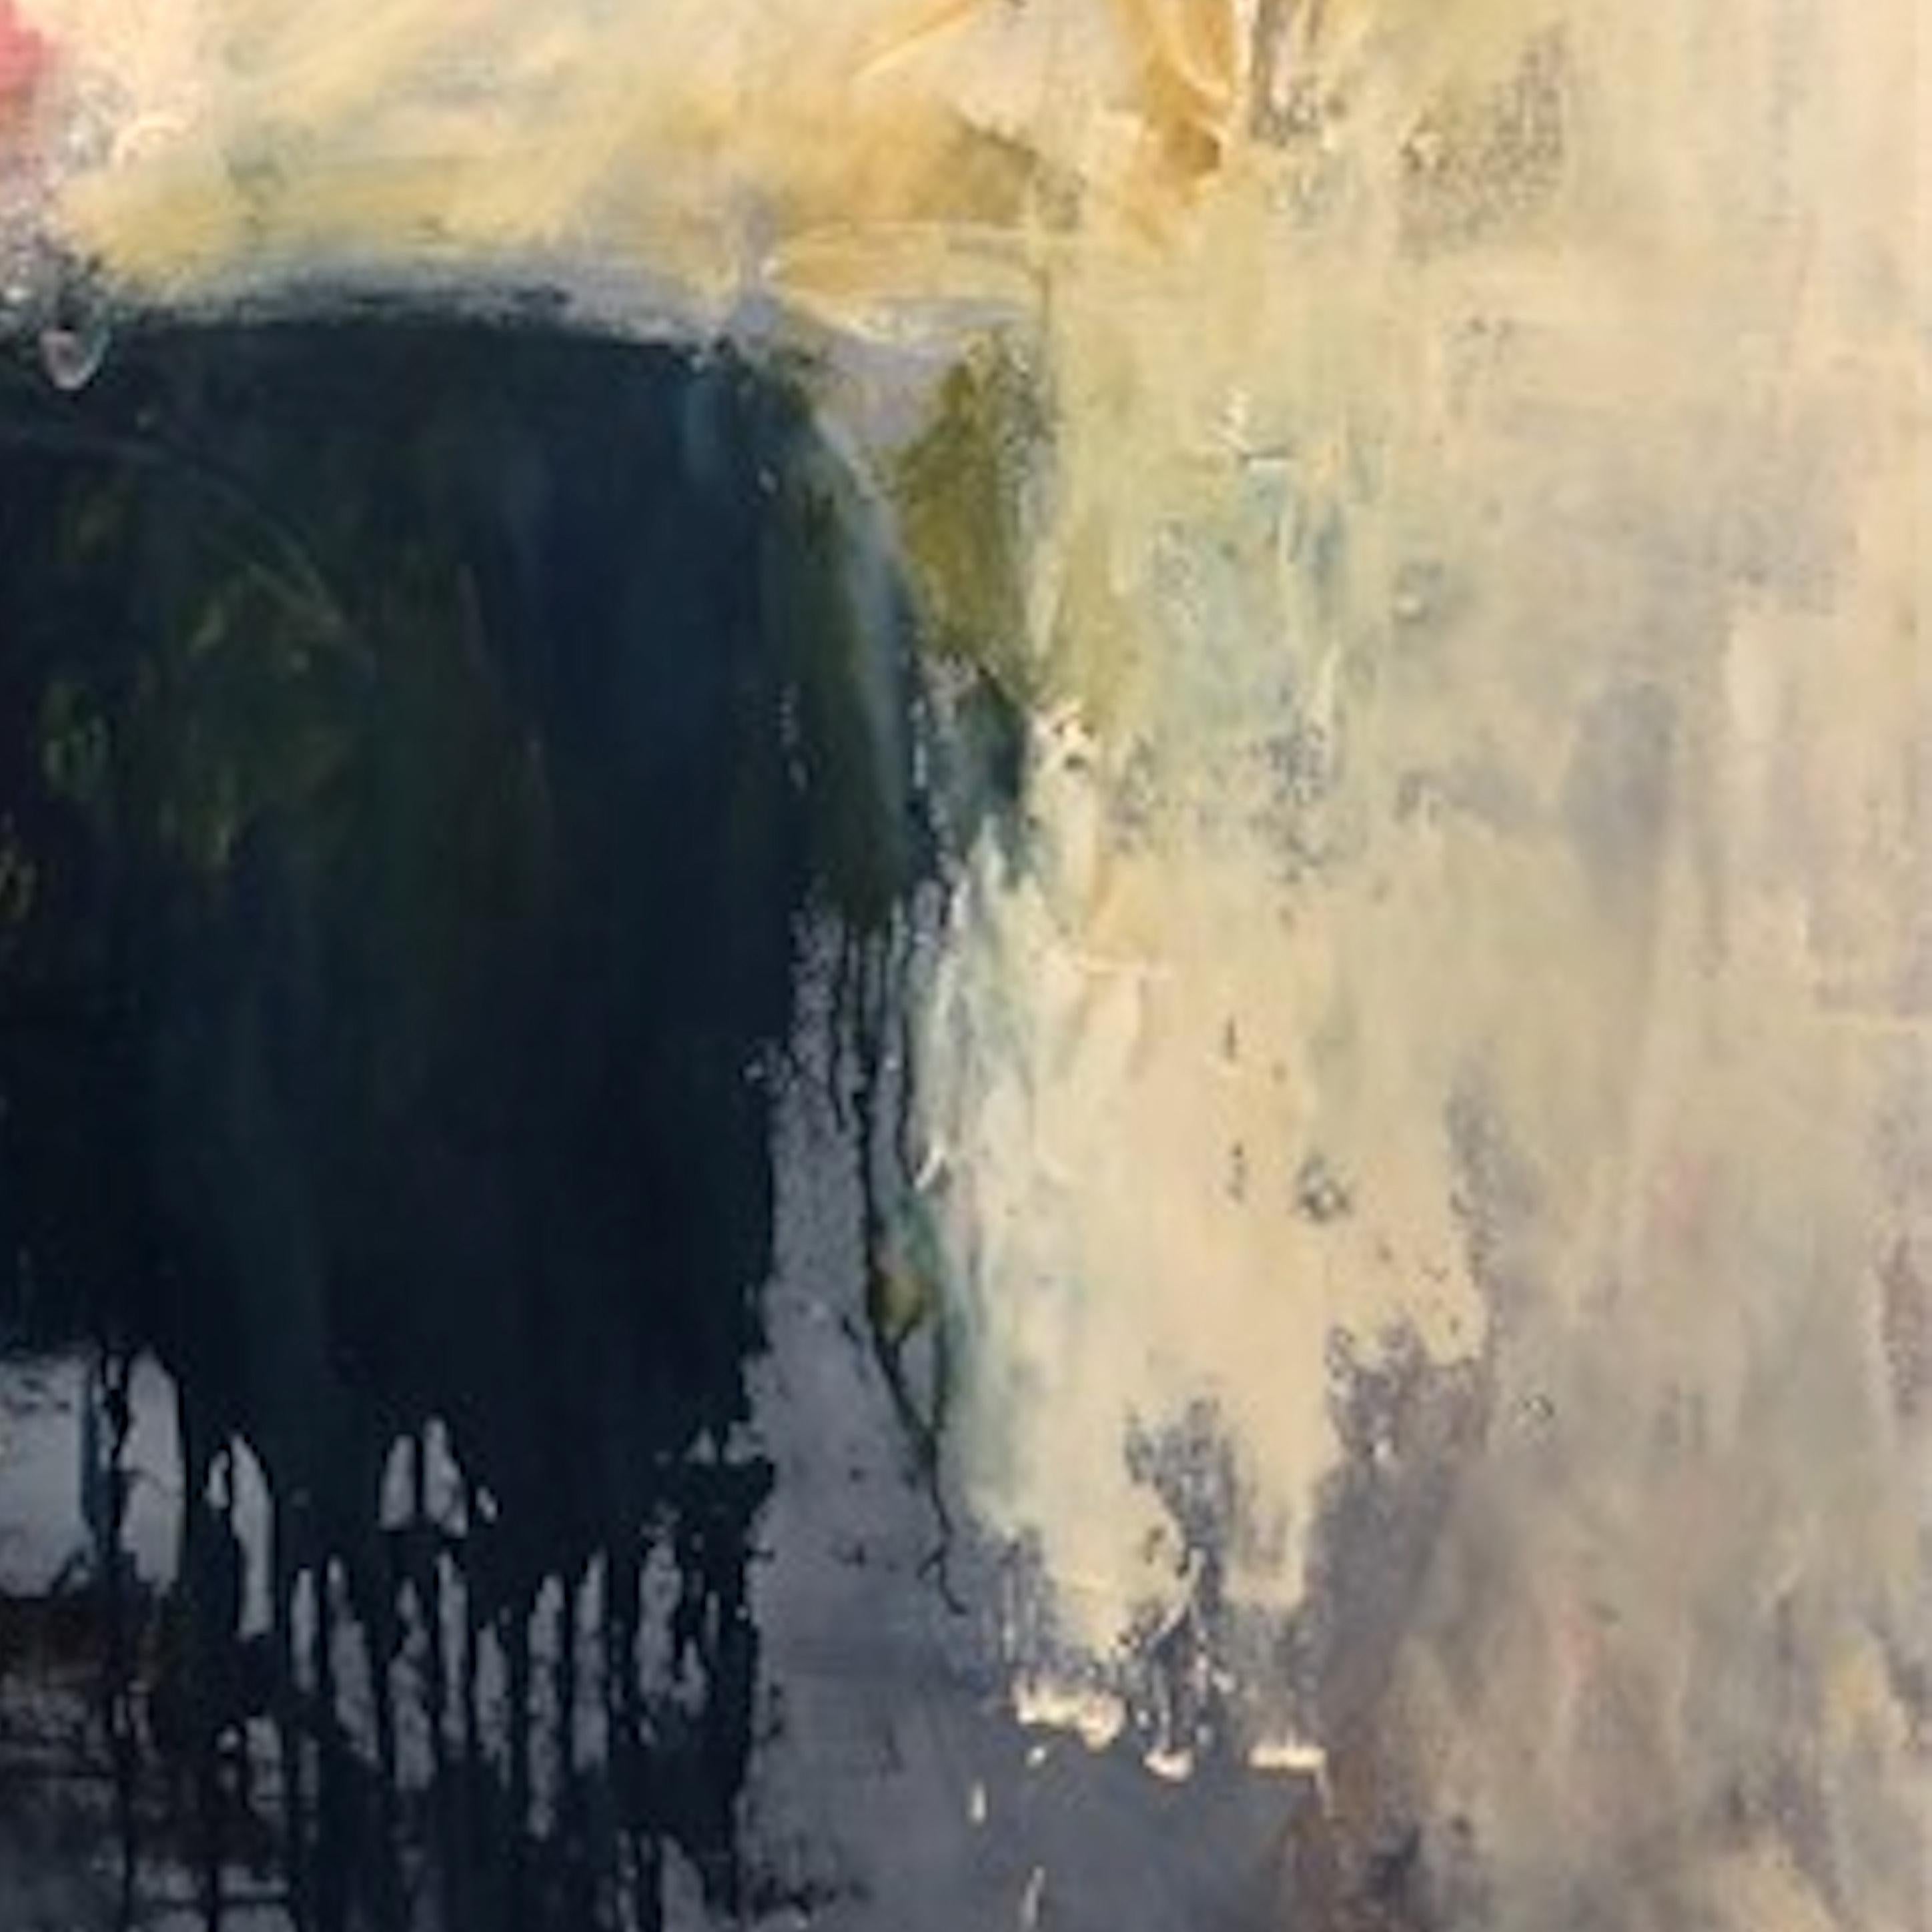 Abstract.  Vibrant.  Painting.

About the Artist: 
Alicia is a versatile painter working in a variety of styles including impressionism, traditional and abstract.  Her paintings are inspired by her love and passion for travel and seeing the